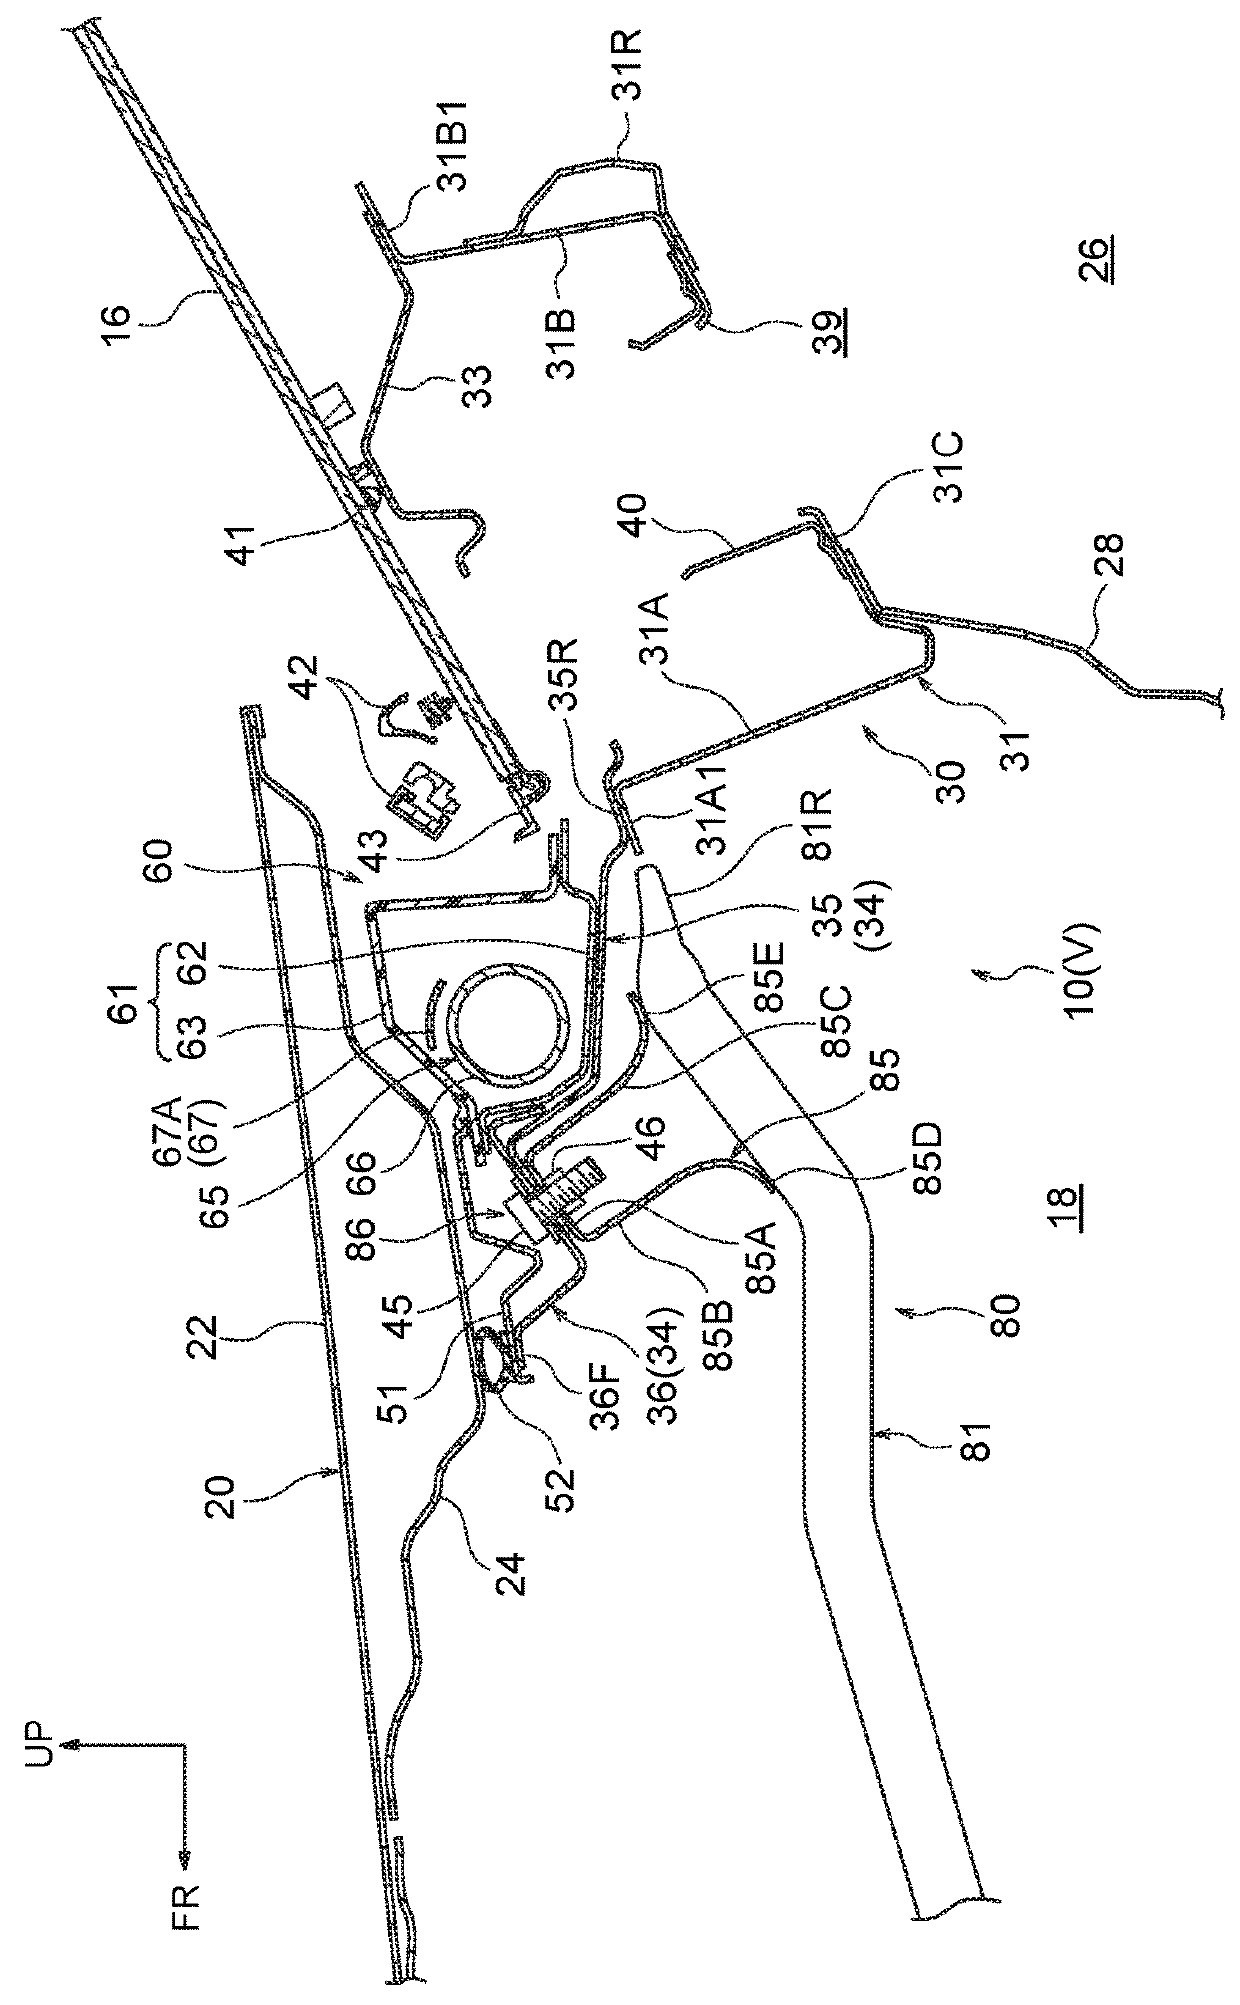 Vehicle front portion structure equipped with pedestrian airbag device